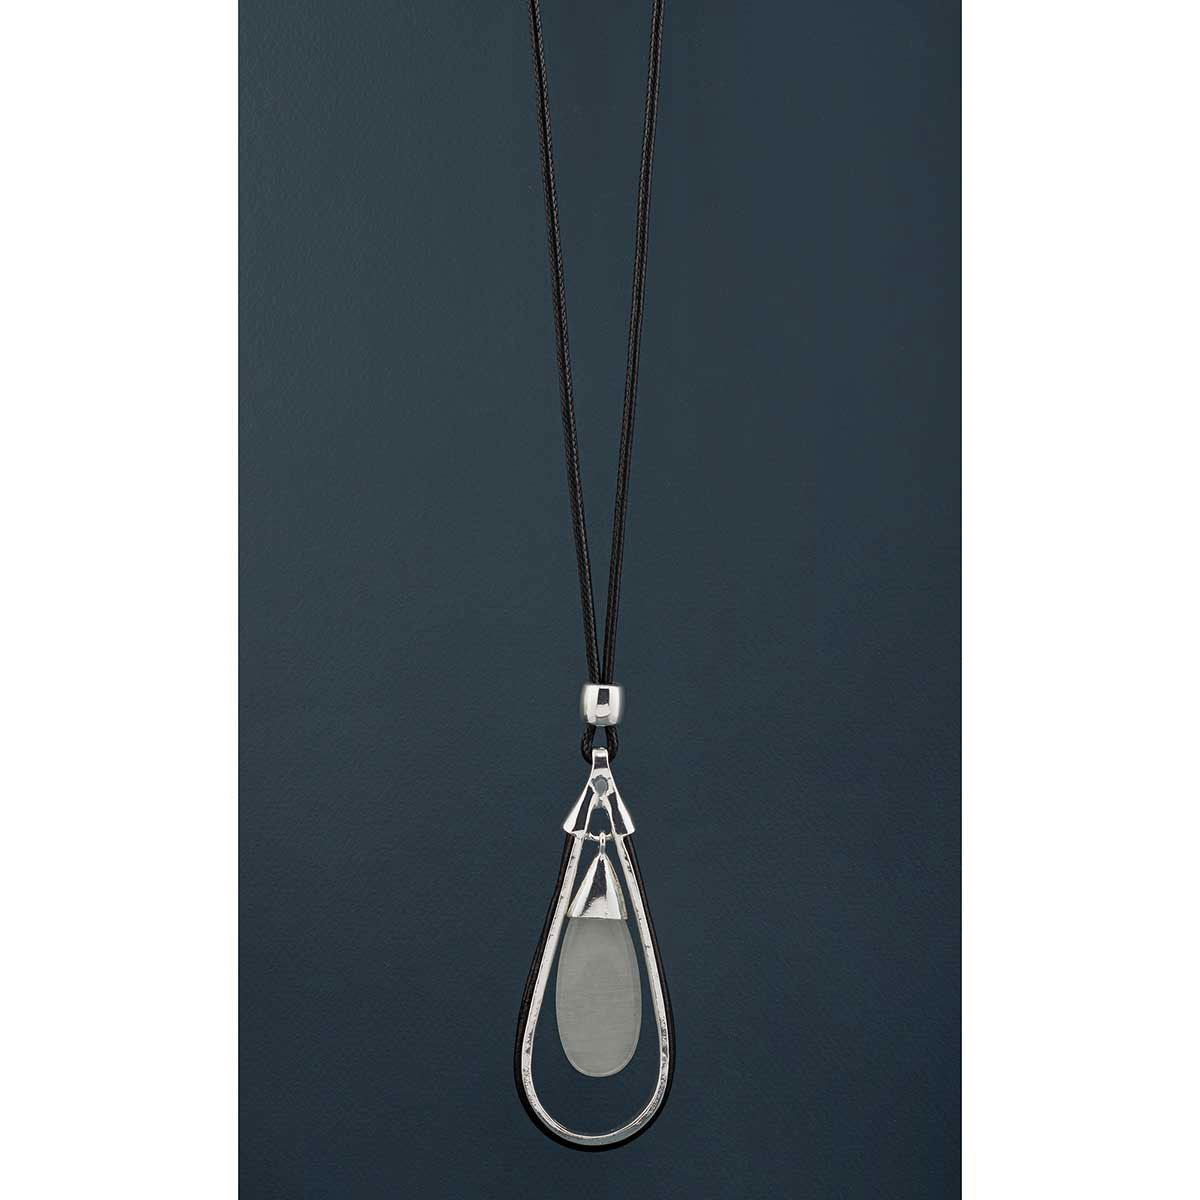 NECKLACE TEARDROP WITH CRYSTAL 1.75IN X 4IN; 33-36IN